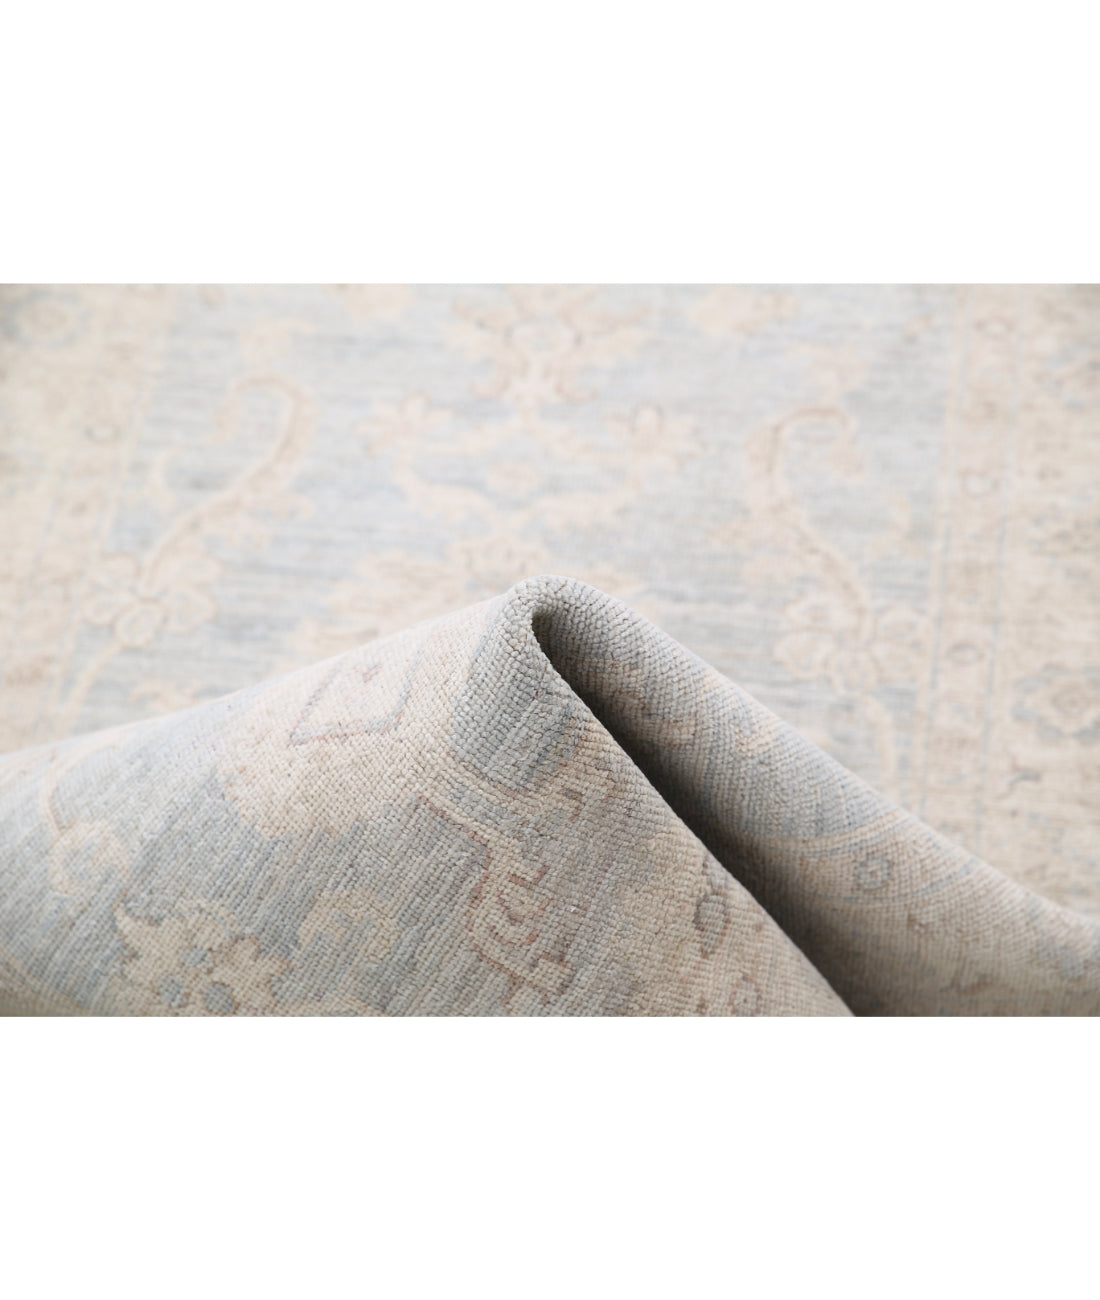 Hand Knotted Serenity Wool Rug - 2'8'' x 6'3'' 2'8'' x 6'3'' (80 X 188) / Grey / Ivory